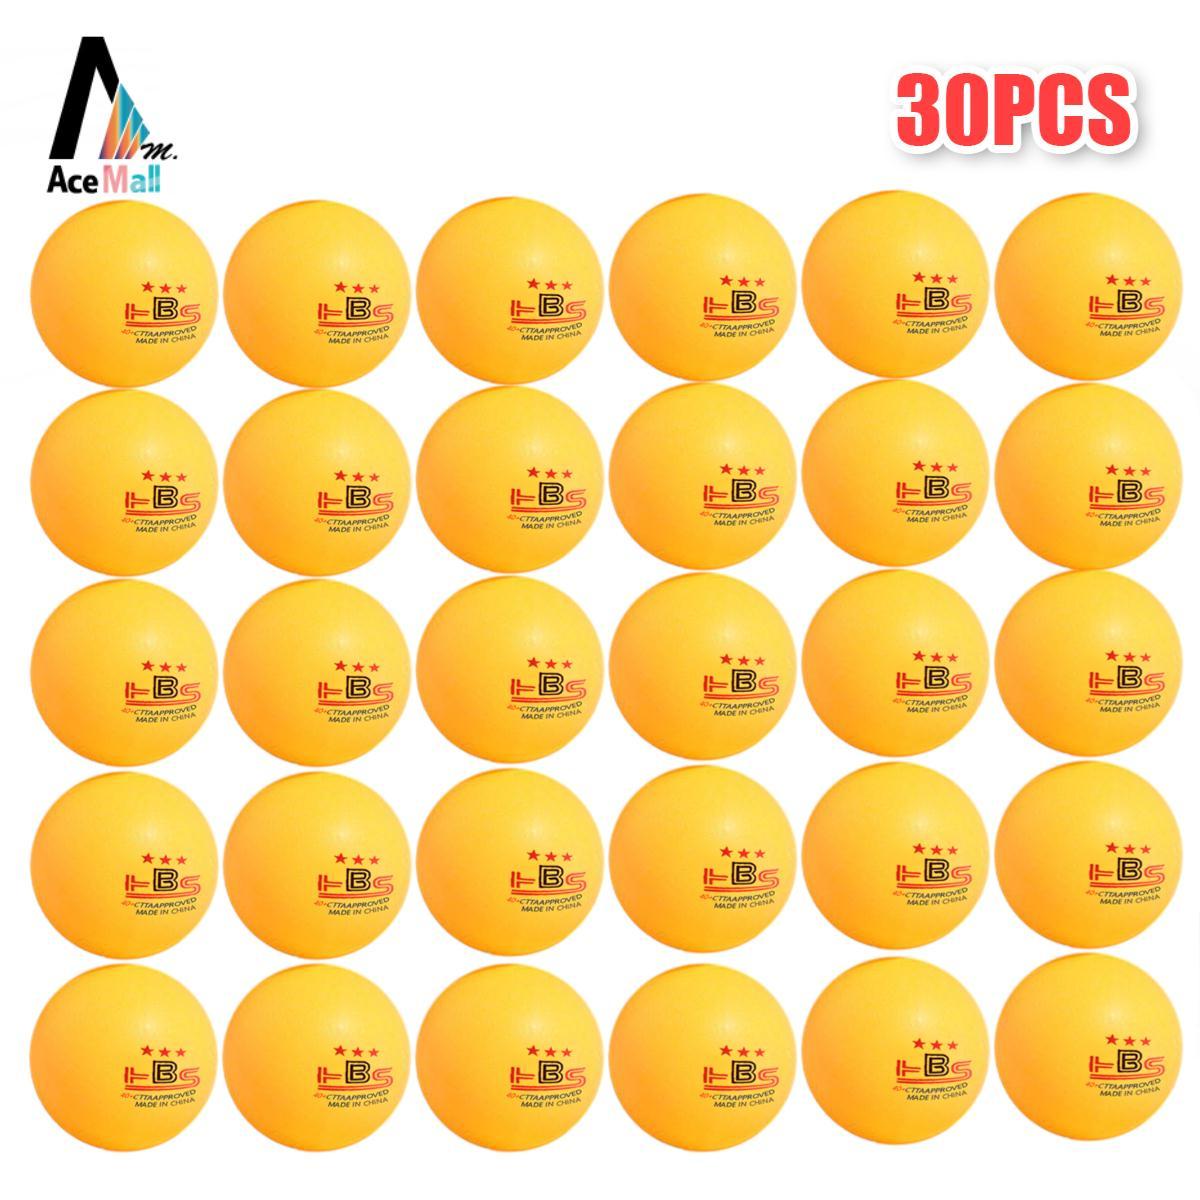 3 Stars DHS 40 MM Olympic Table Tennis White Ping Pong Balls 5 Boxes 30 Pcs 